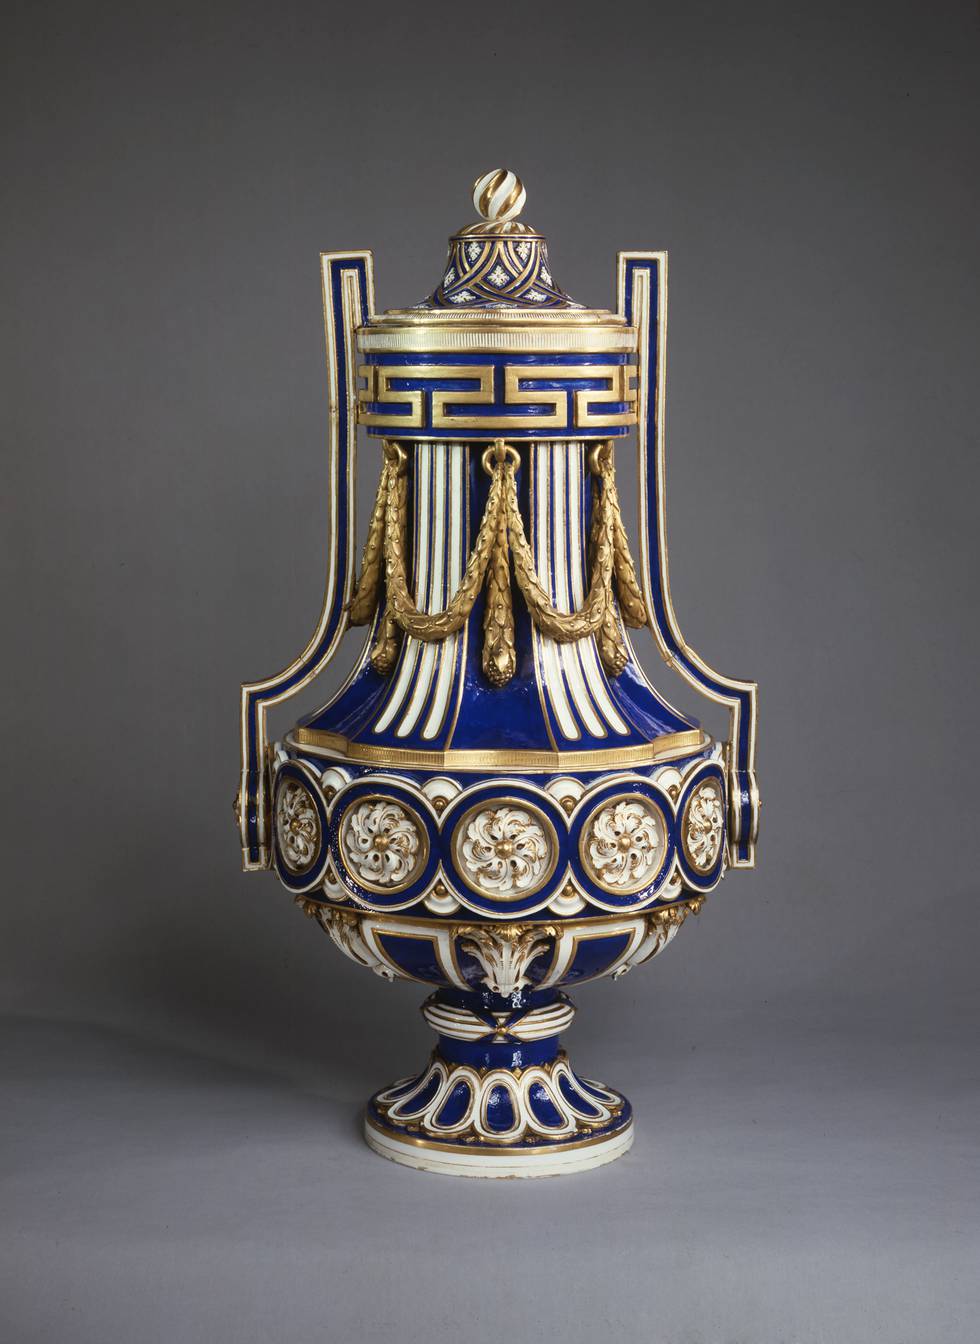 Sèvres porcelain vase with Neoclassical decoration in gold and deep blue